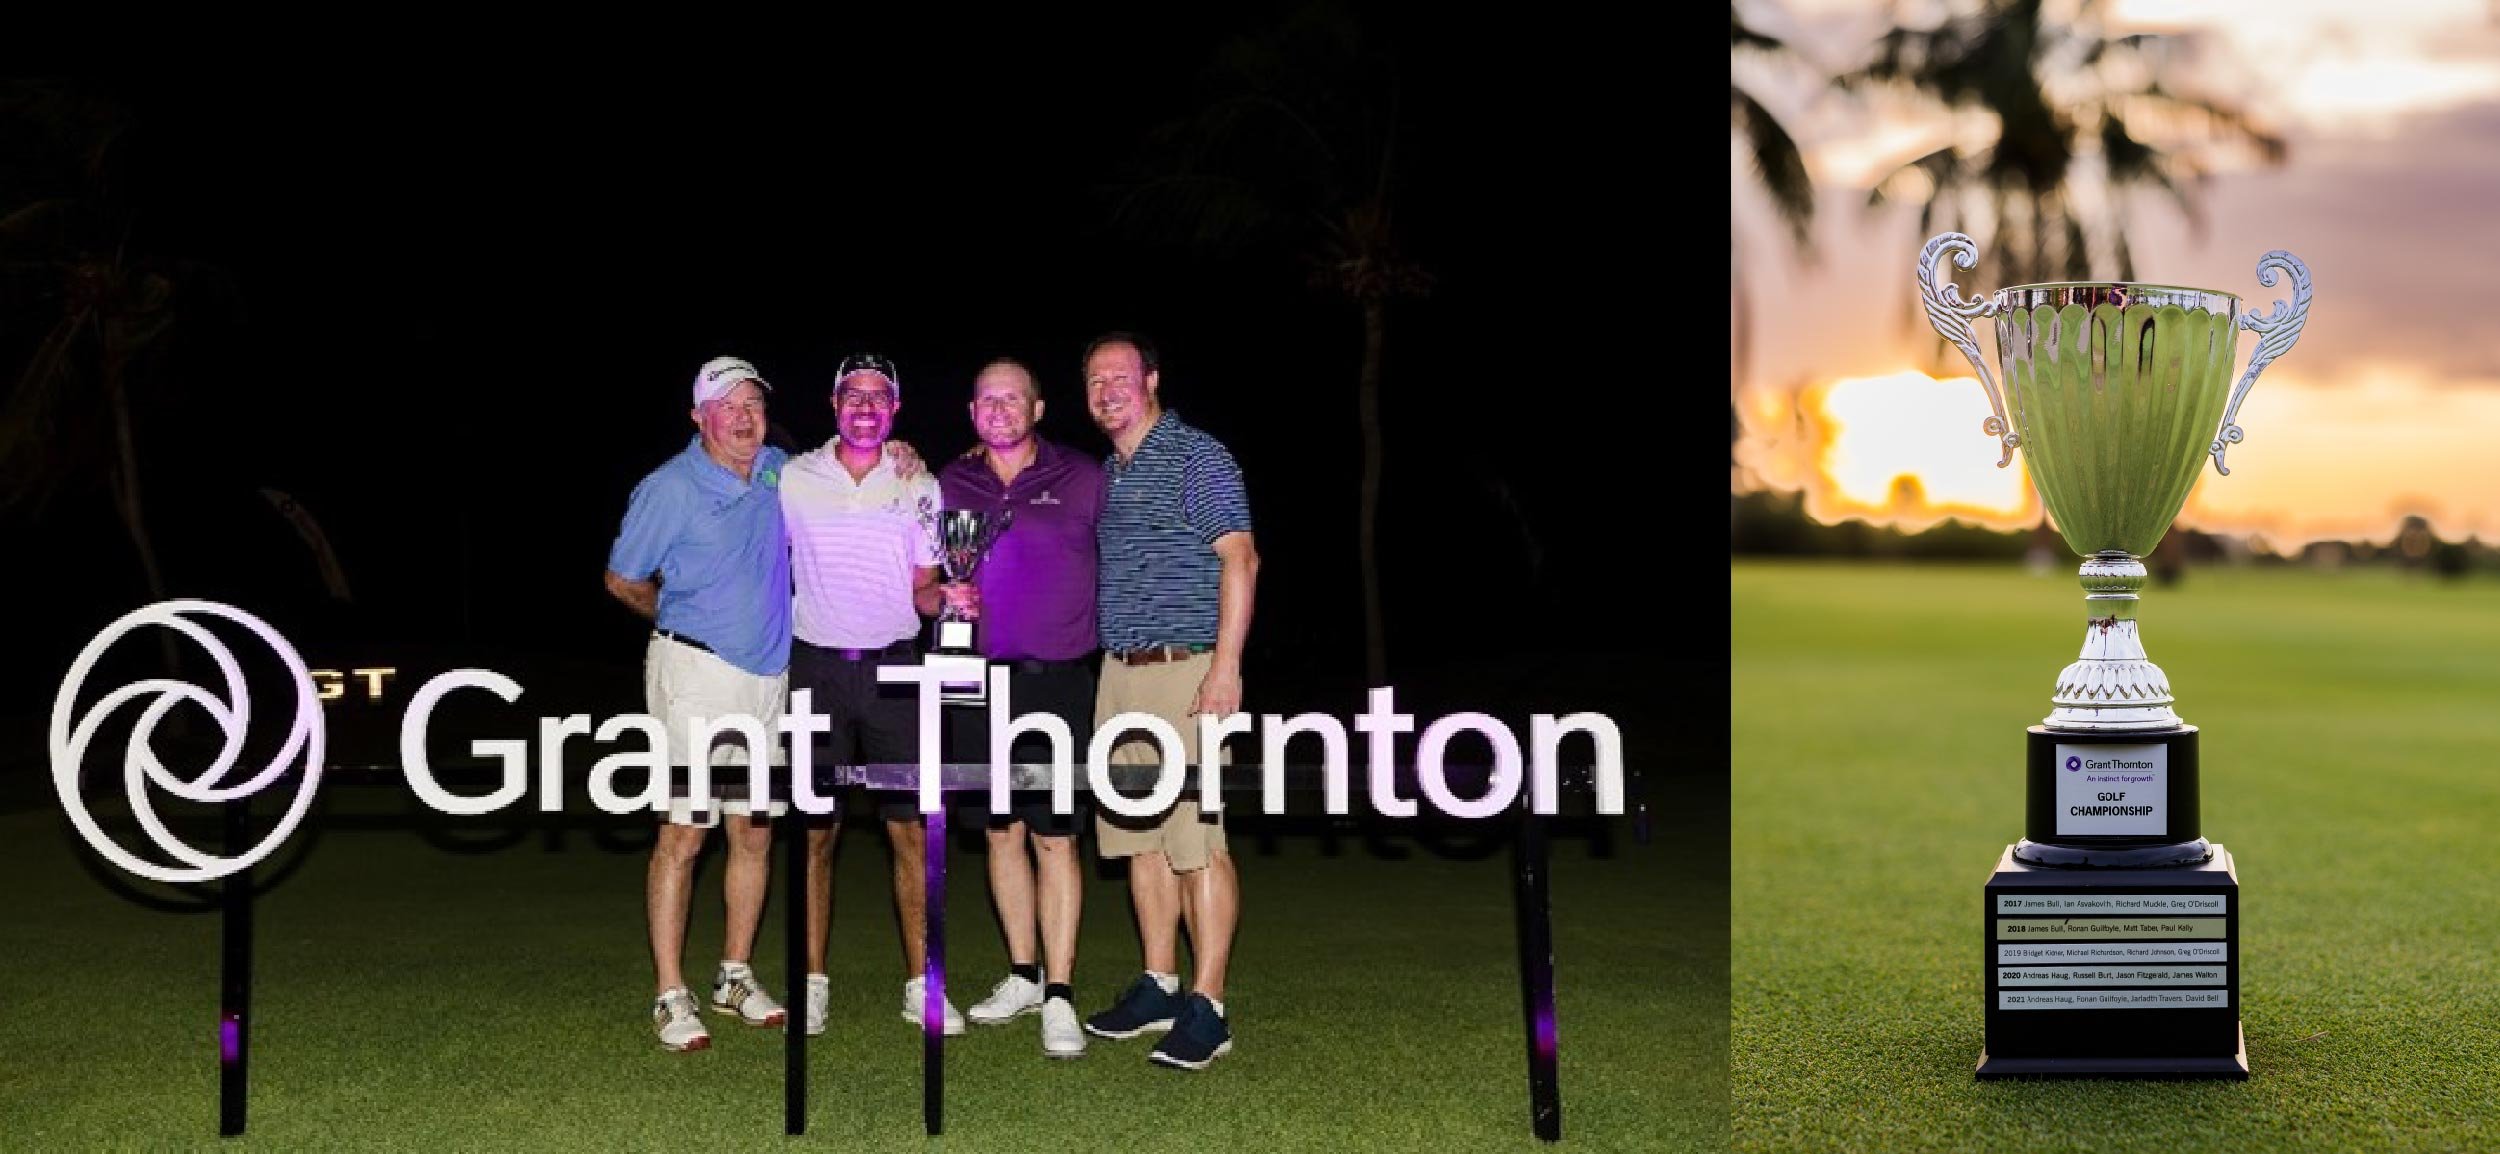 Grant Thornton Cayman Islands raises over US20,000 for charities at